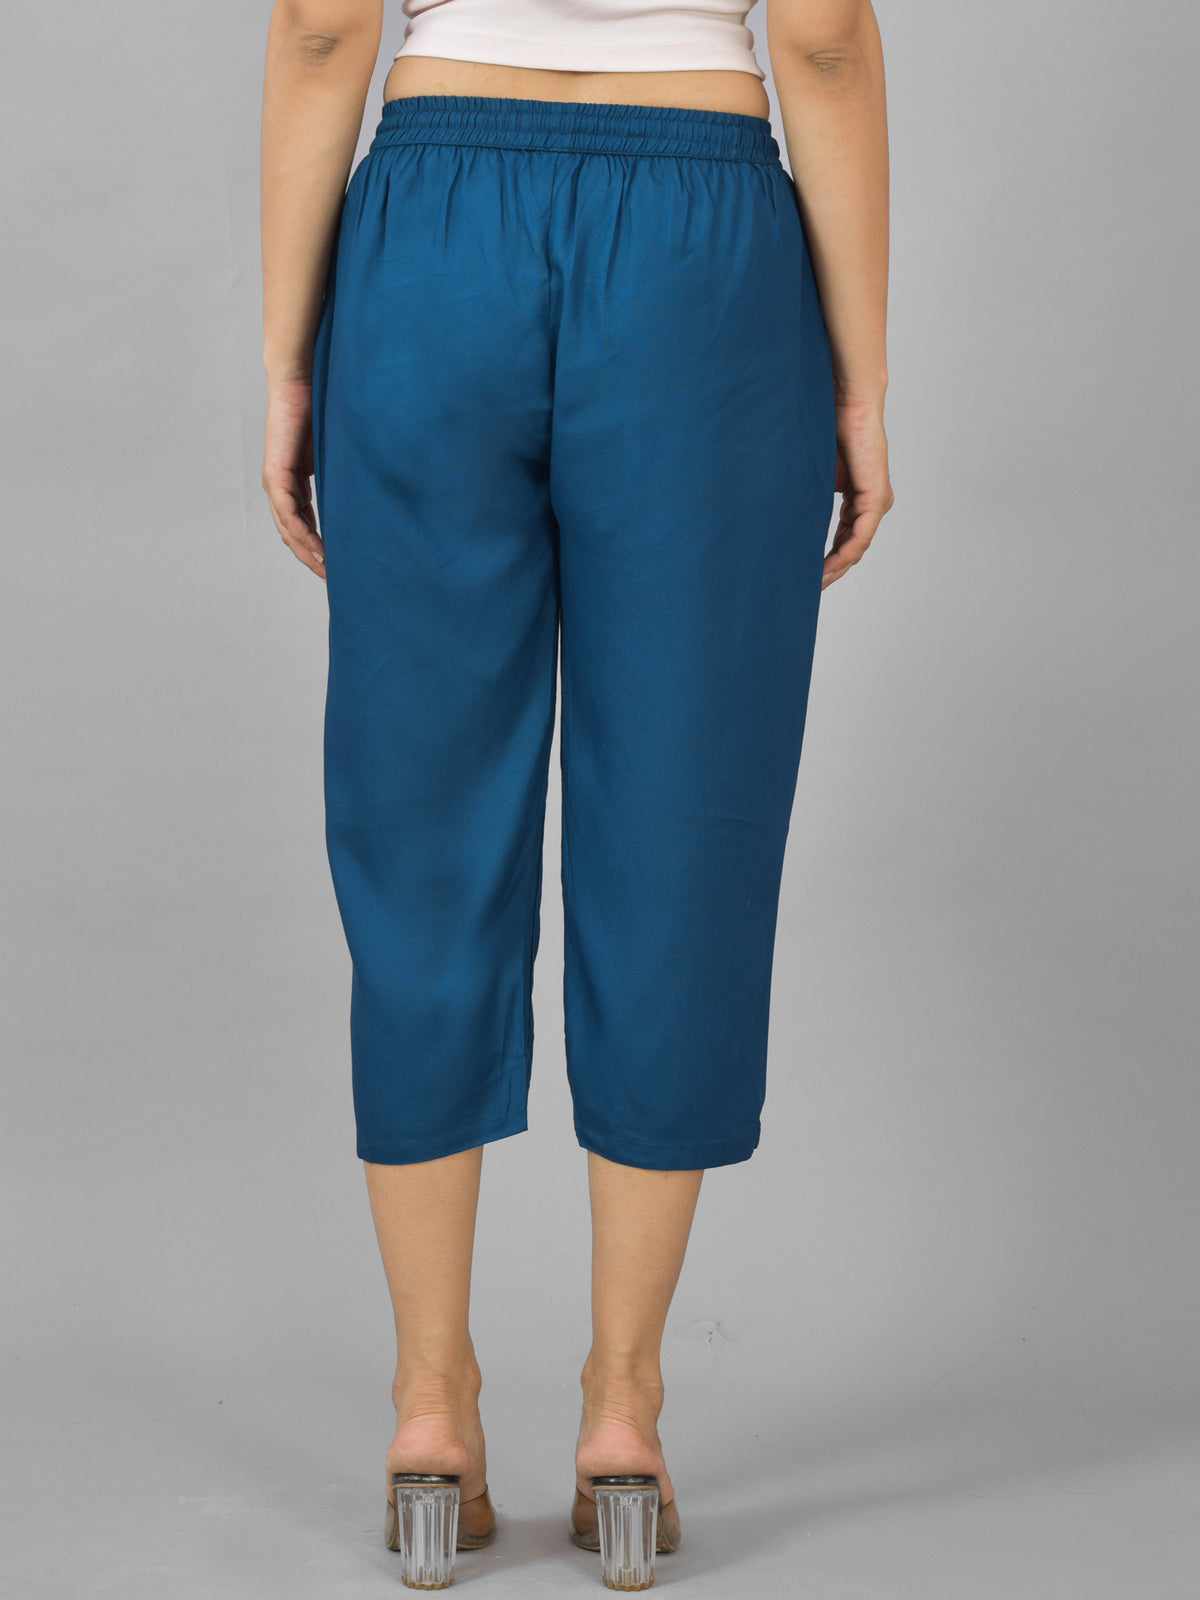 Pack Of 2 Womens Gajri And Teal Blue Calf Length Rayon Culottes Trouser Combo